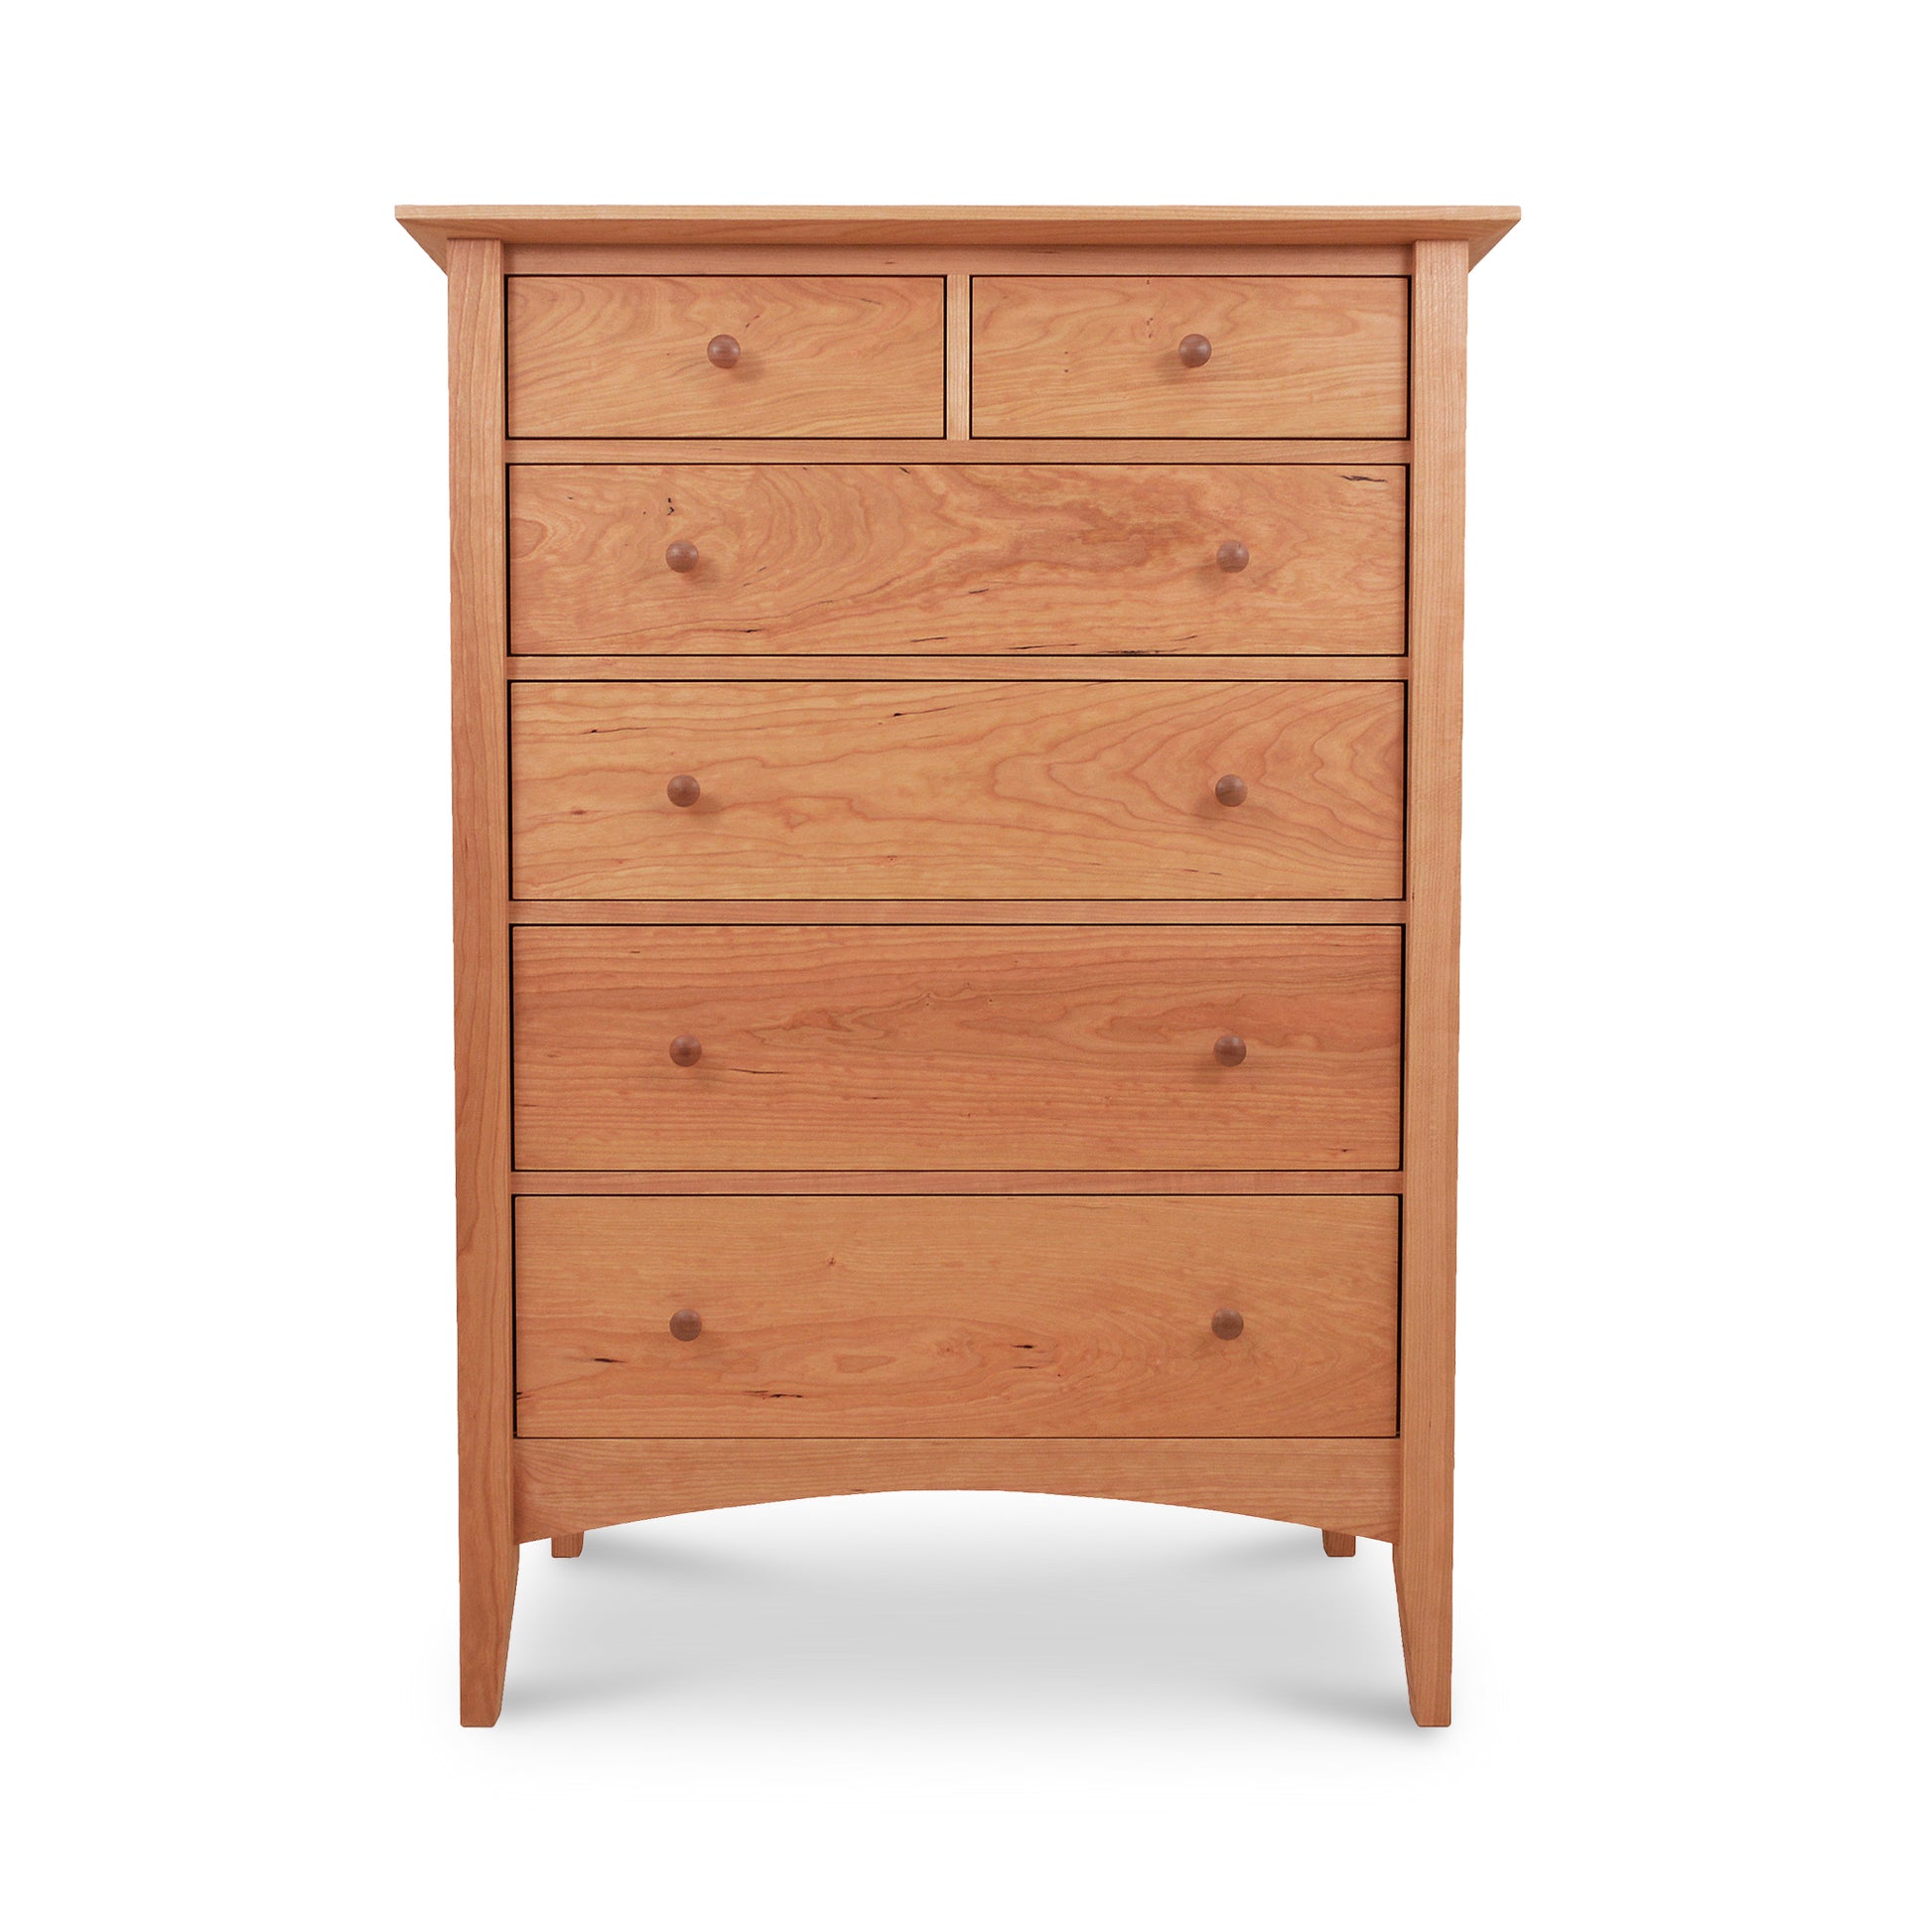 A Maple Corner Woodworks American Shaker 6-Drawer Chest on a white background.